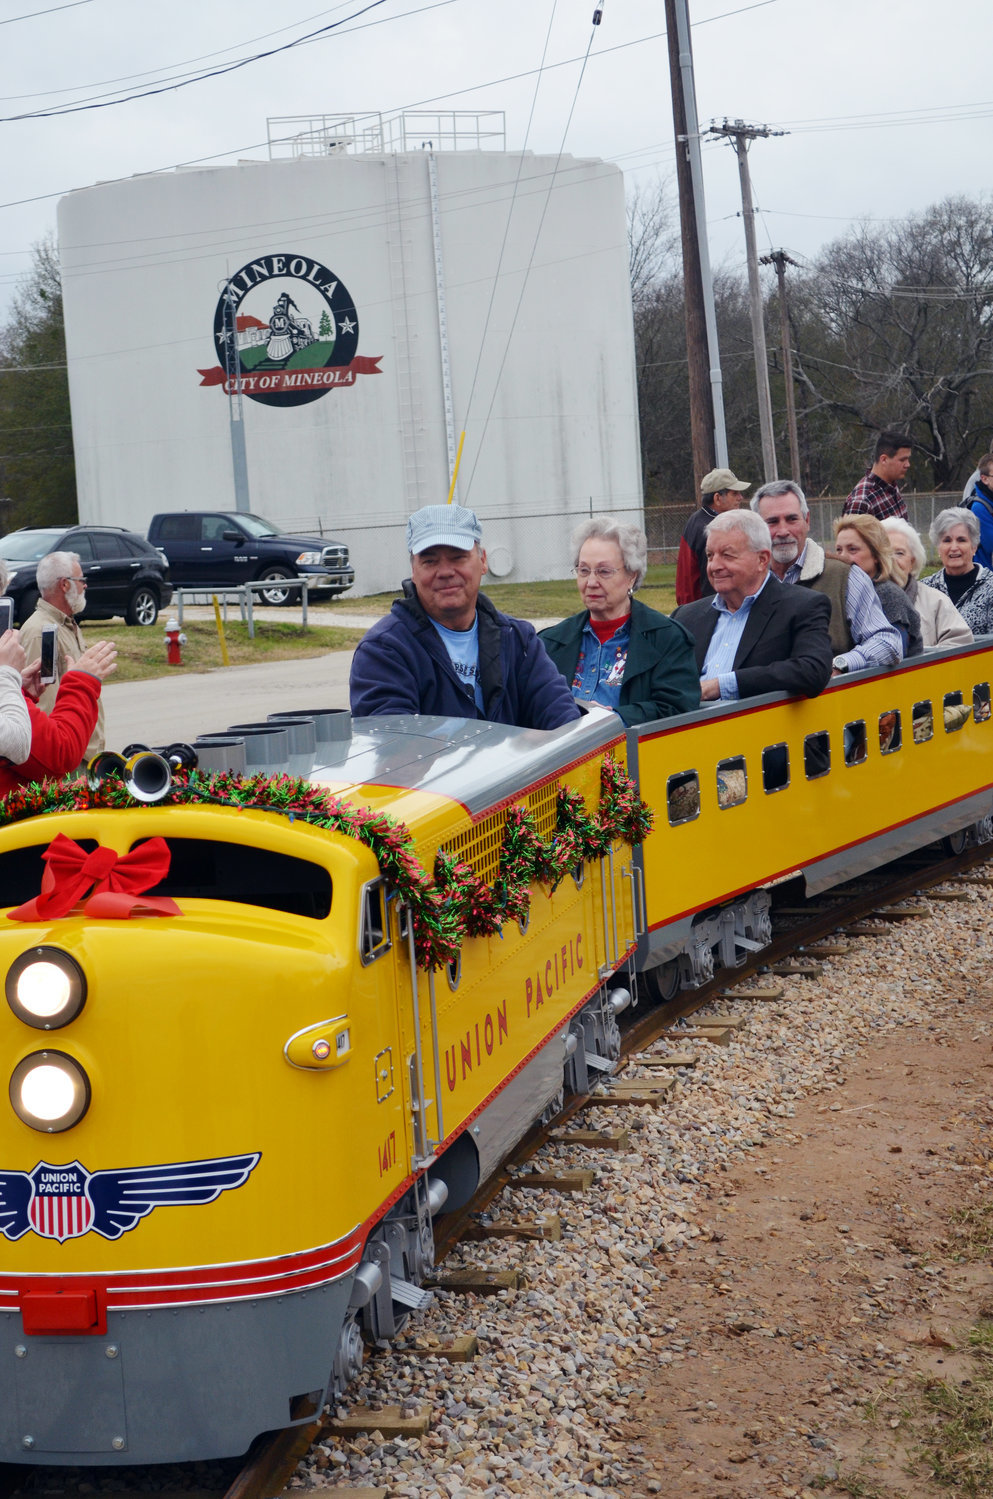 The Harry Meredith Special made its inaugural run last week at Iron Horse Square Park in Mineola. The miniature train will be a permanent fixture at Iron Horse Square Park on West Front Street. Among the first passengers aboard the train were members of the Meredith Foundation, which committed $129,942 for the project, and Brian Steck, whose ETAS Metal Roof & Wall Systems designed the train barn and donated materials for it. The engineer was Glen Thurman, a local contractor who supervised the construction of the track.